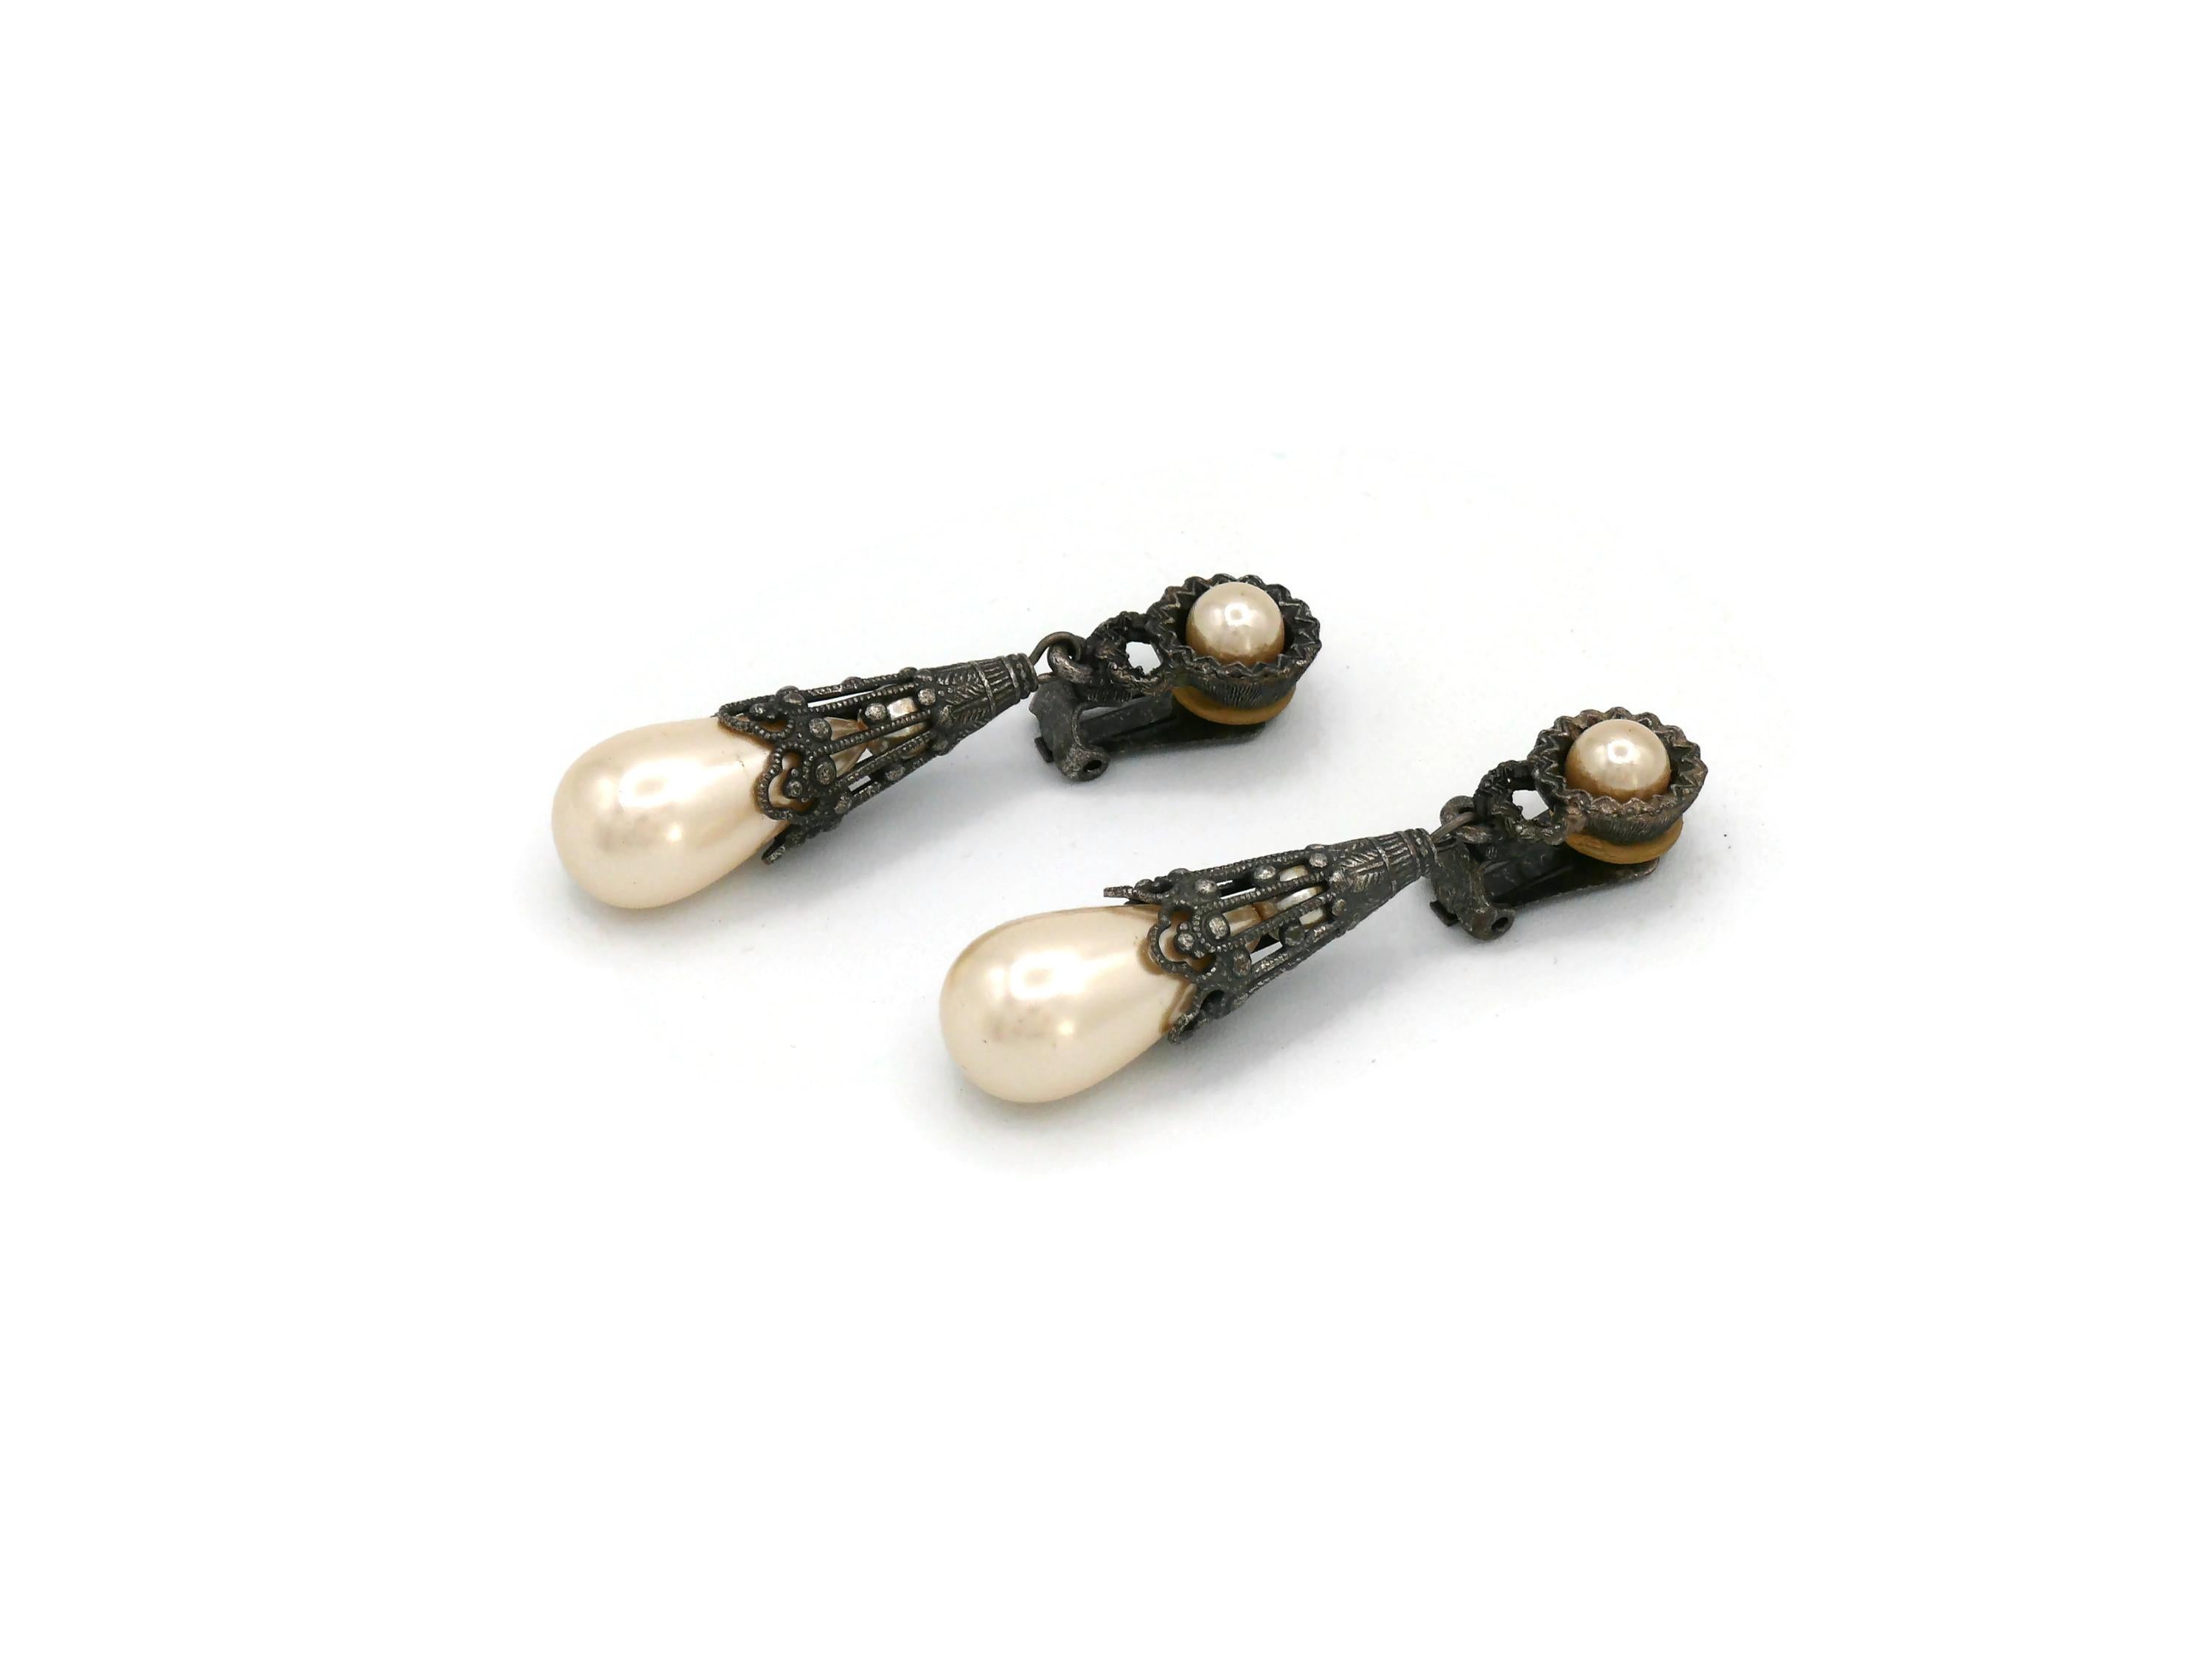 CHRISTIAN DIOR Vintage Victorian Insipred Faux Pearl Dangling Earrings For Sale 2